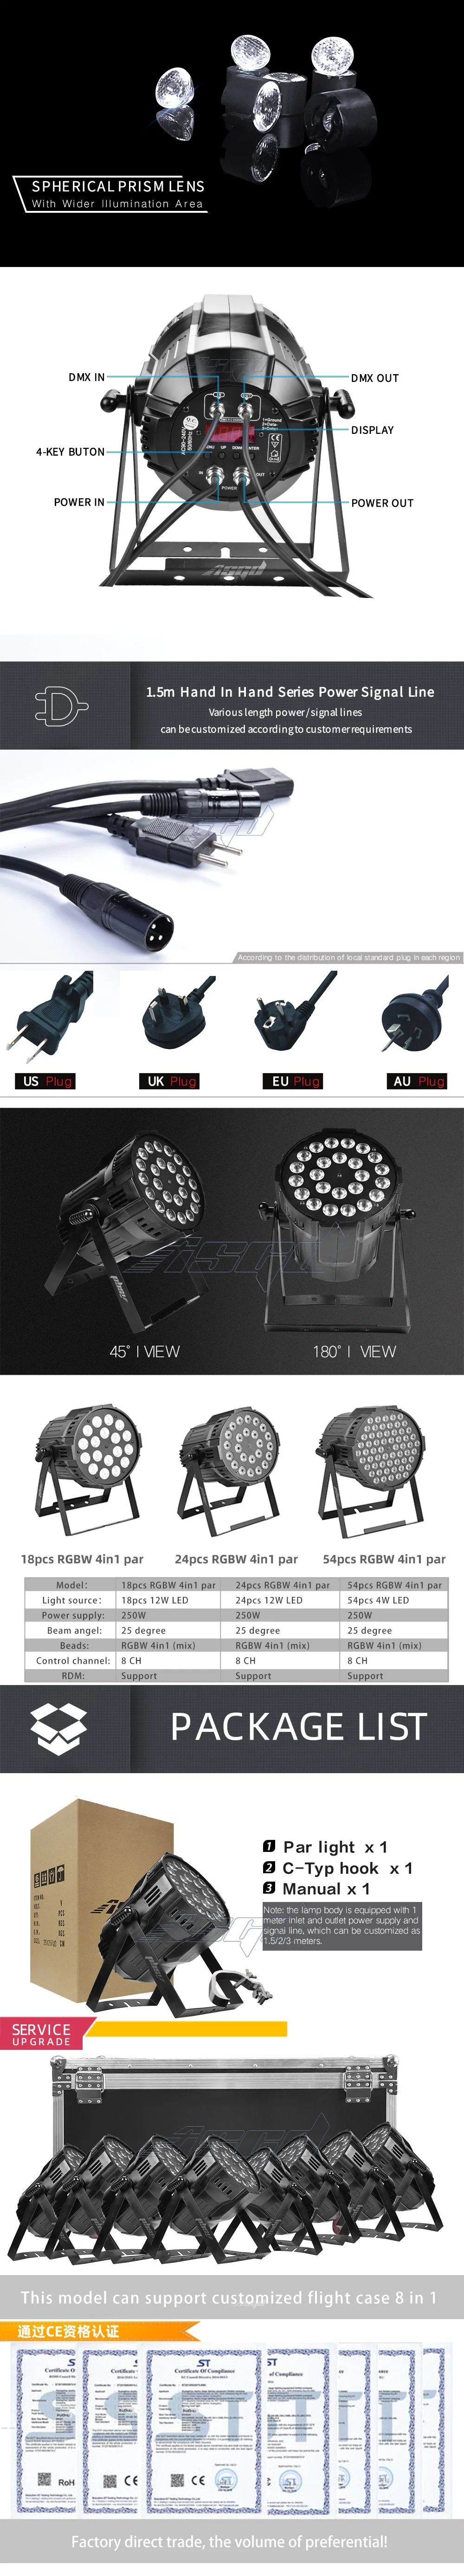 24X12W RGBW 4in1 LED PAR Stage Light Projector Lamp for DJ Disco Party Wedding Events Asgd